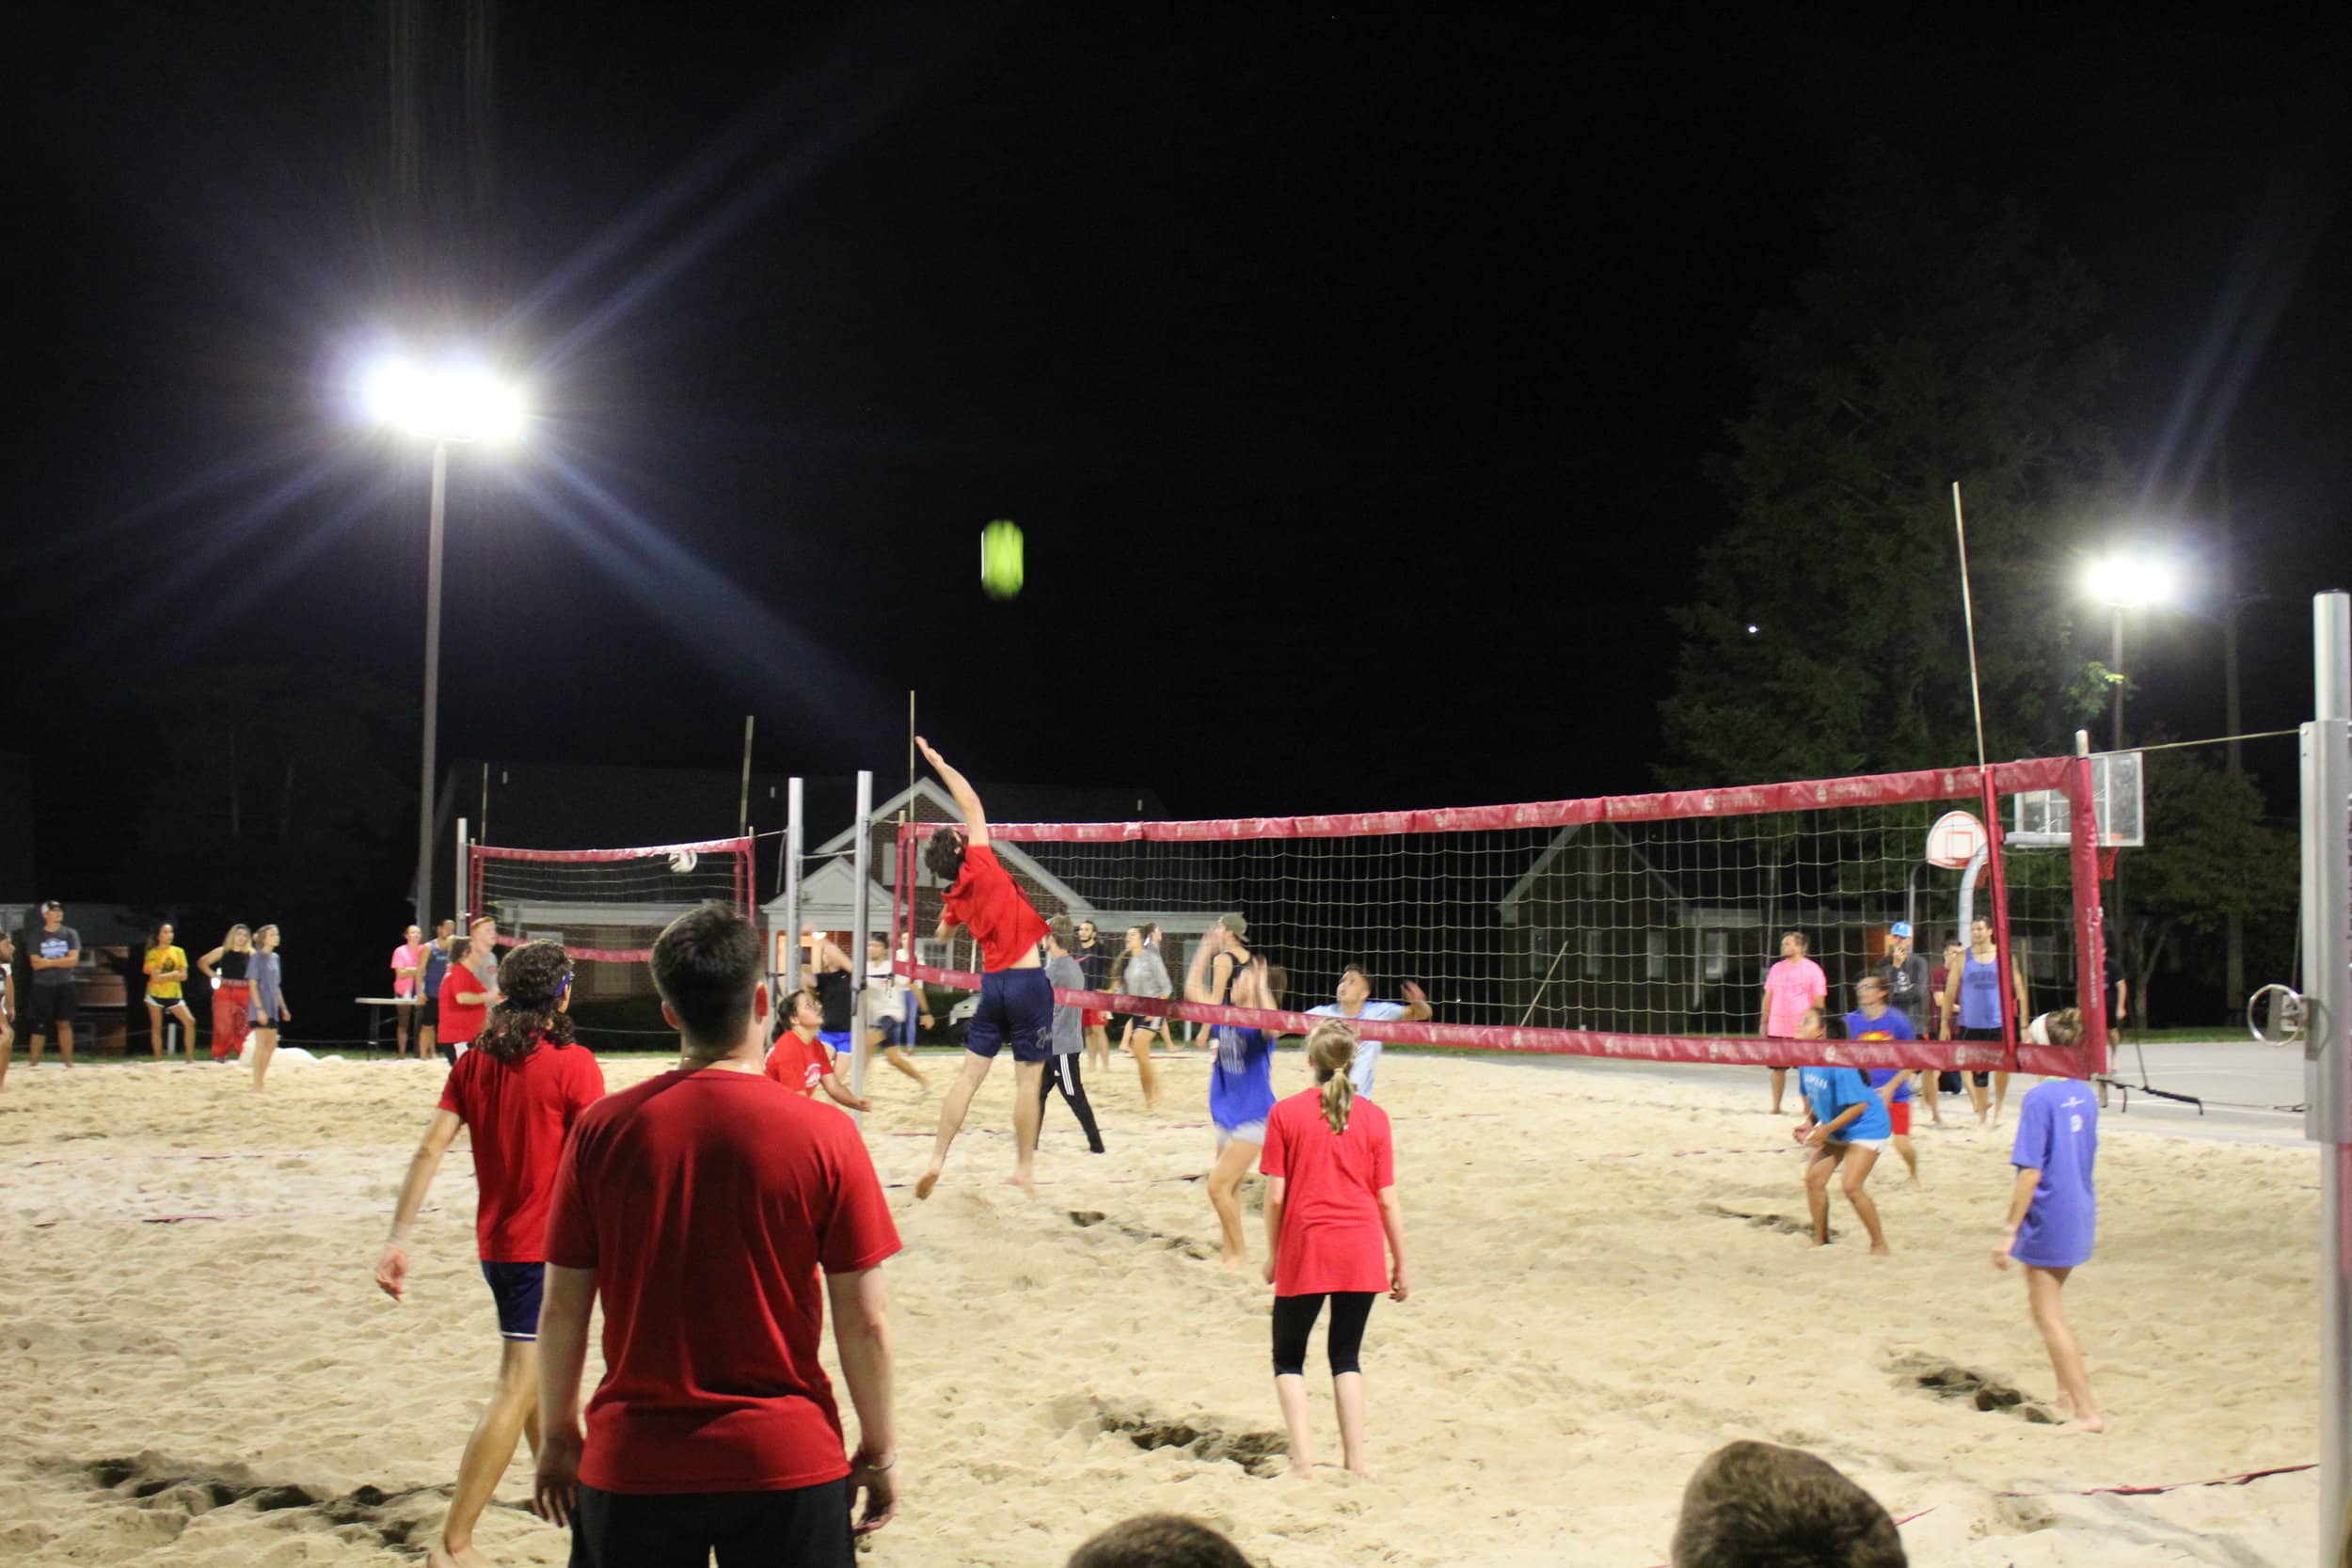 A player on the red team jumps to spike the ball over the net towards the blue team.